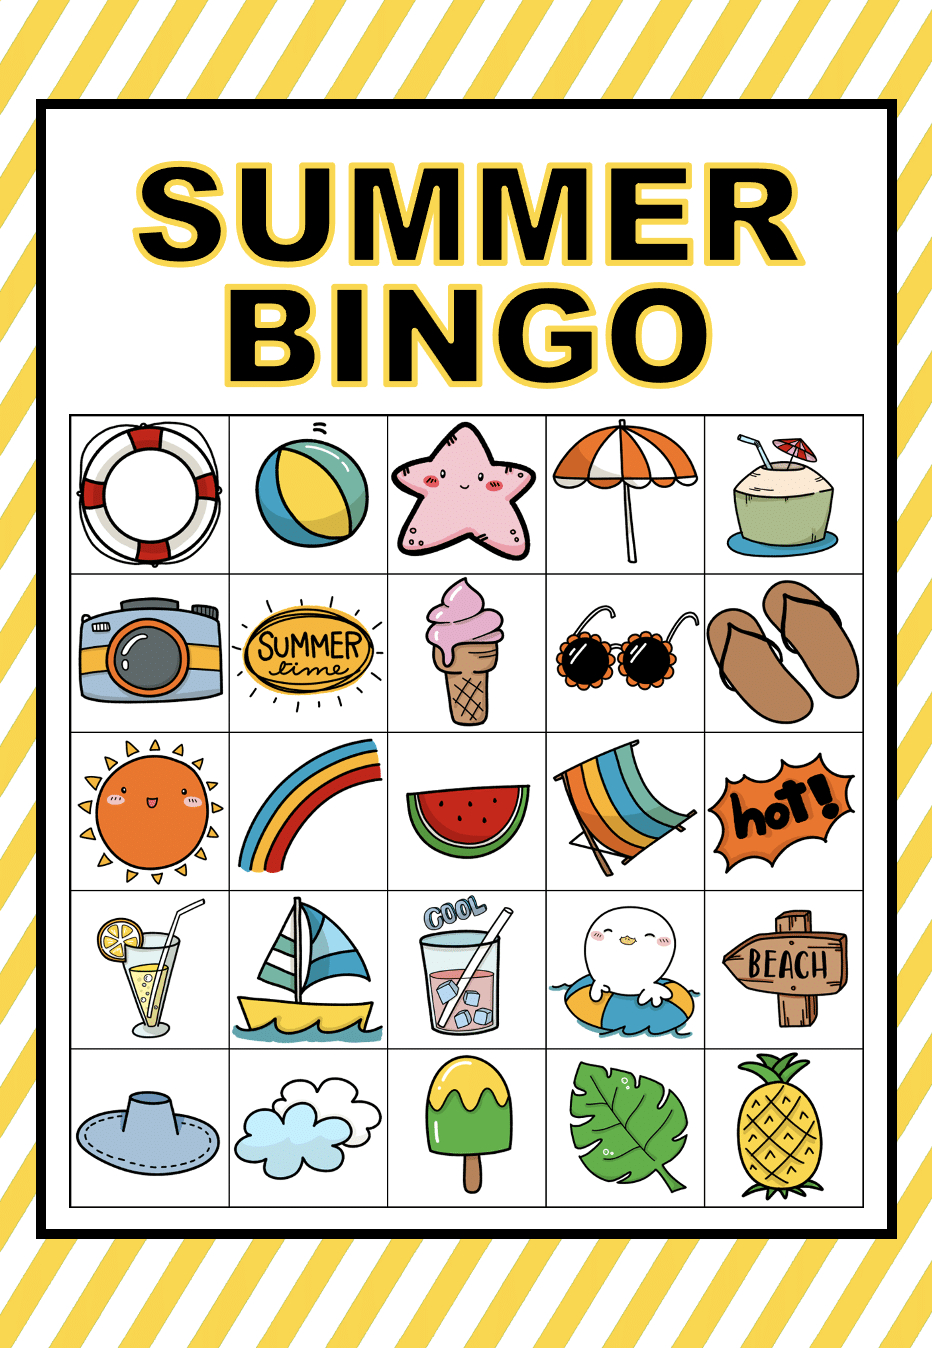 Free Printable Picture Bingo Cards (Summer Edition) - We Made This - Printable Bingo Cards For Large Groups Free